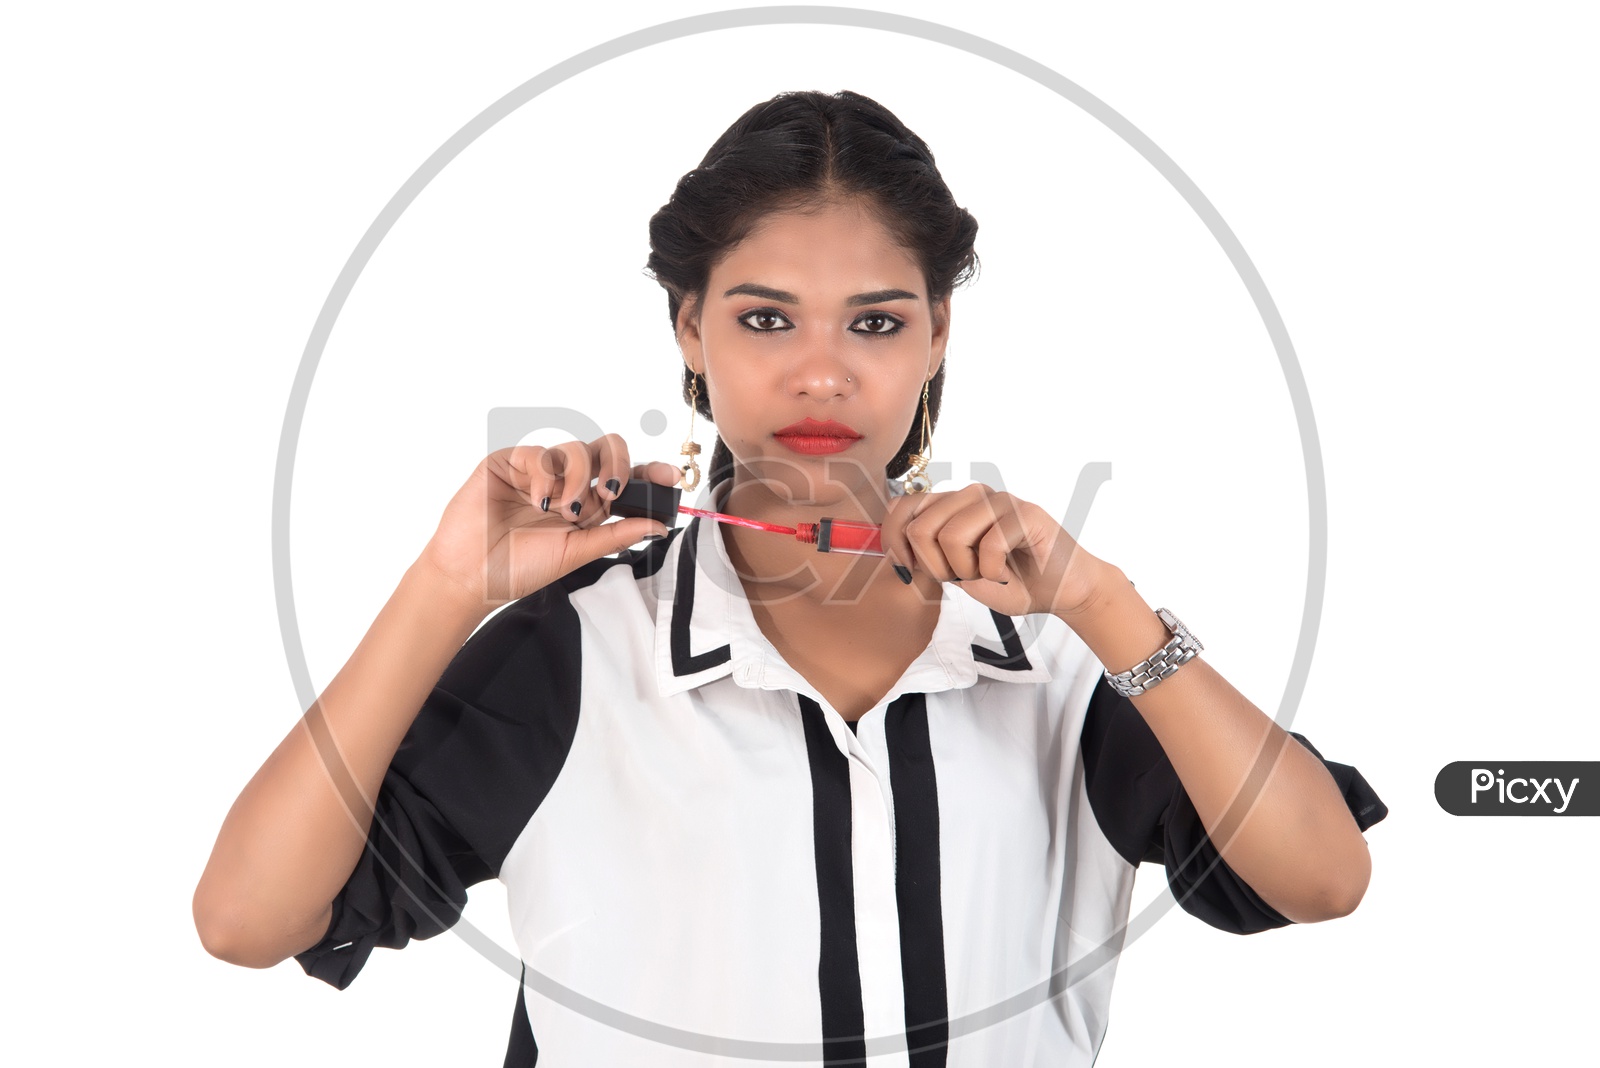 Pretty Young Indian Girl Holding Lipstick In Hand And Posing On an White Background